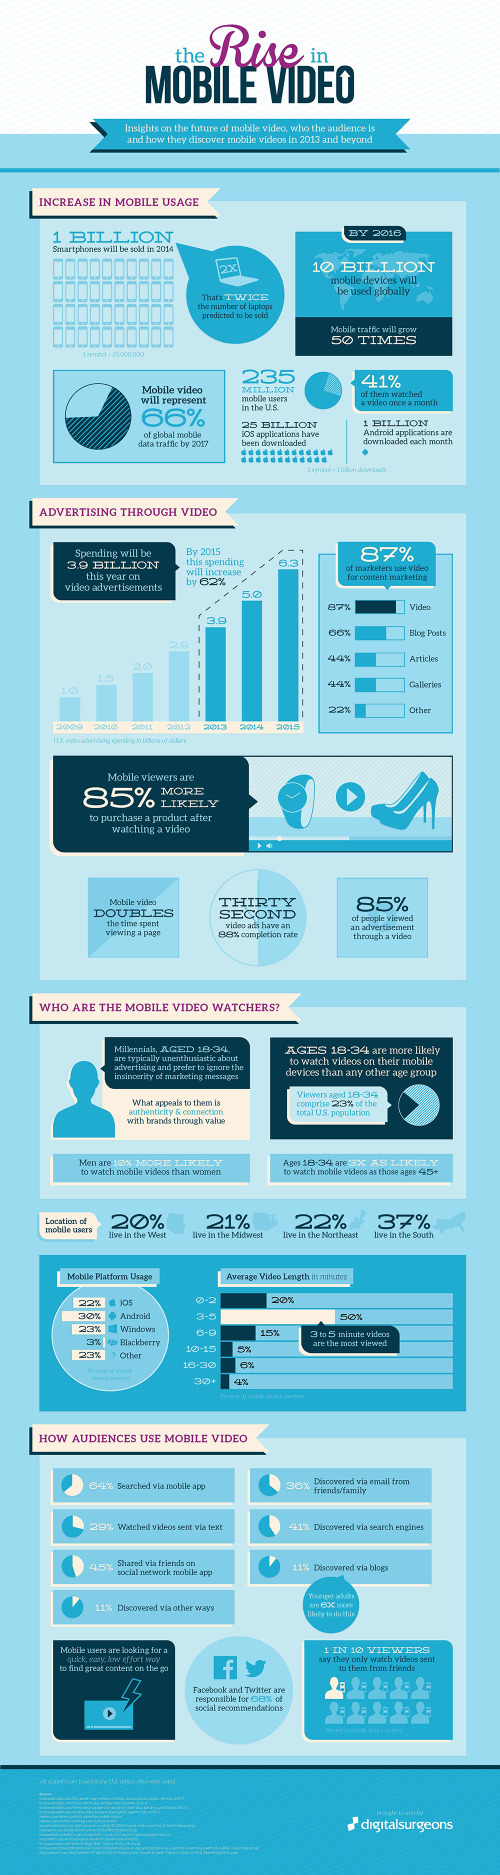 The Rise in Mobile Video infographic